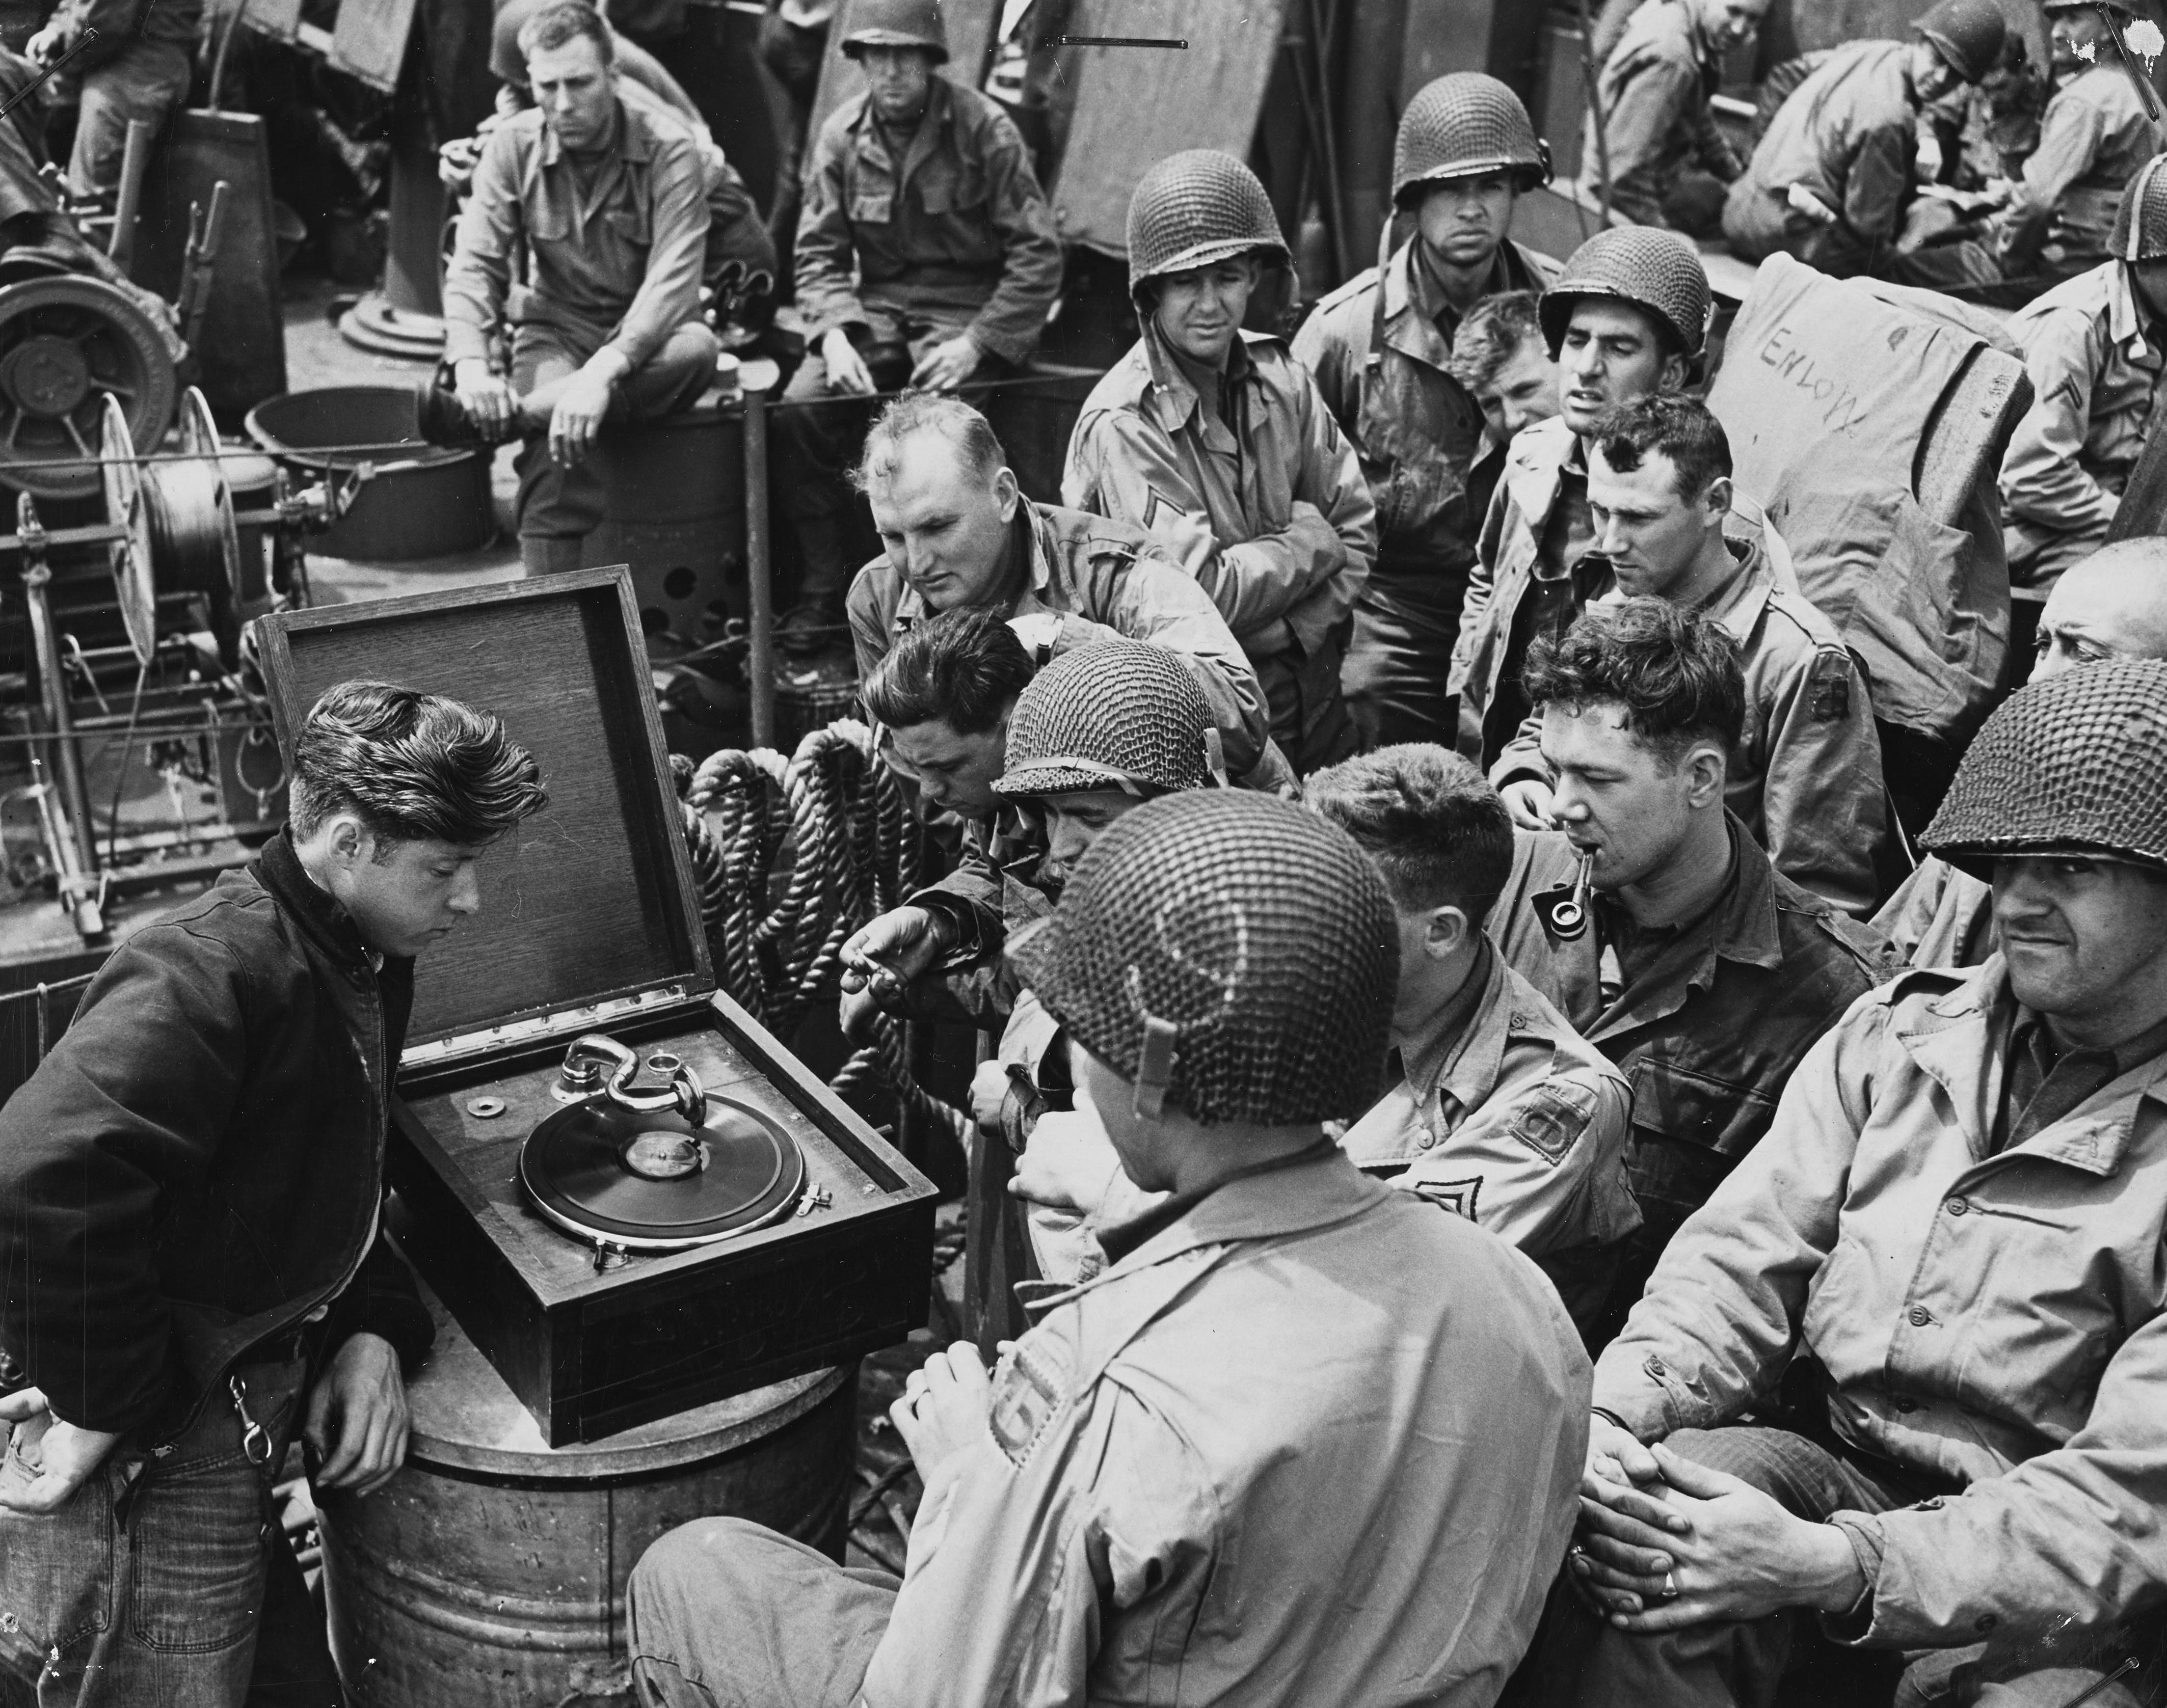 American troops off to battle towards the coast of France, while listening to records. English Channel, 1944.jpg